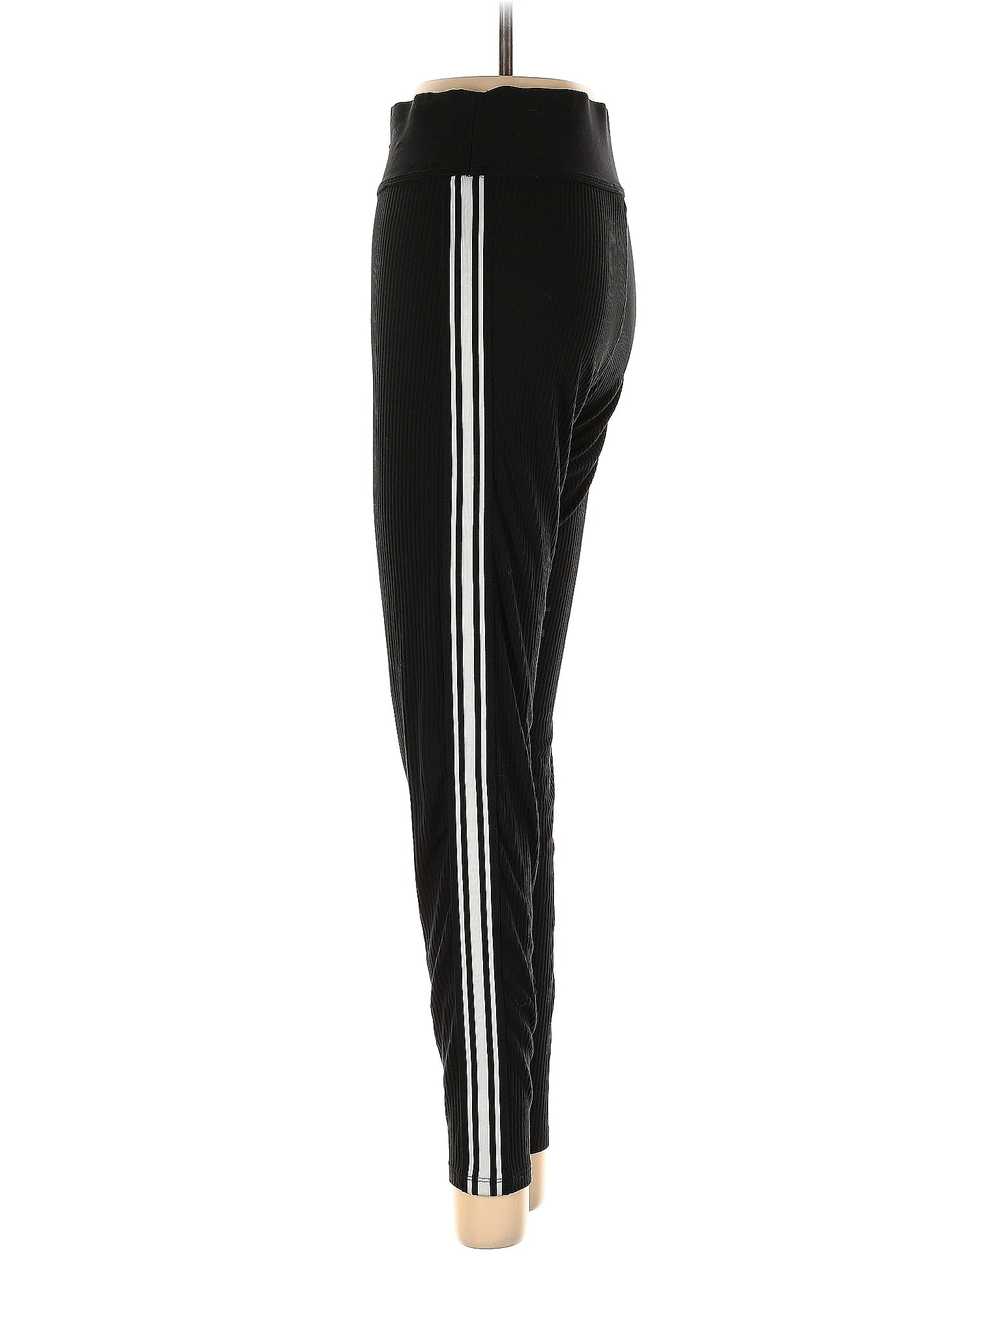 Express One Eleven Women Black Casual Pants S - image 2